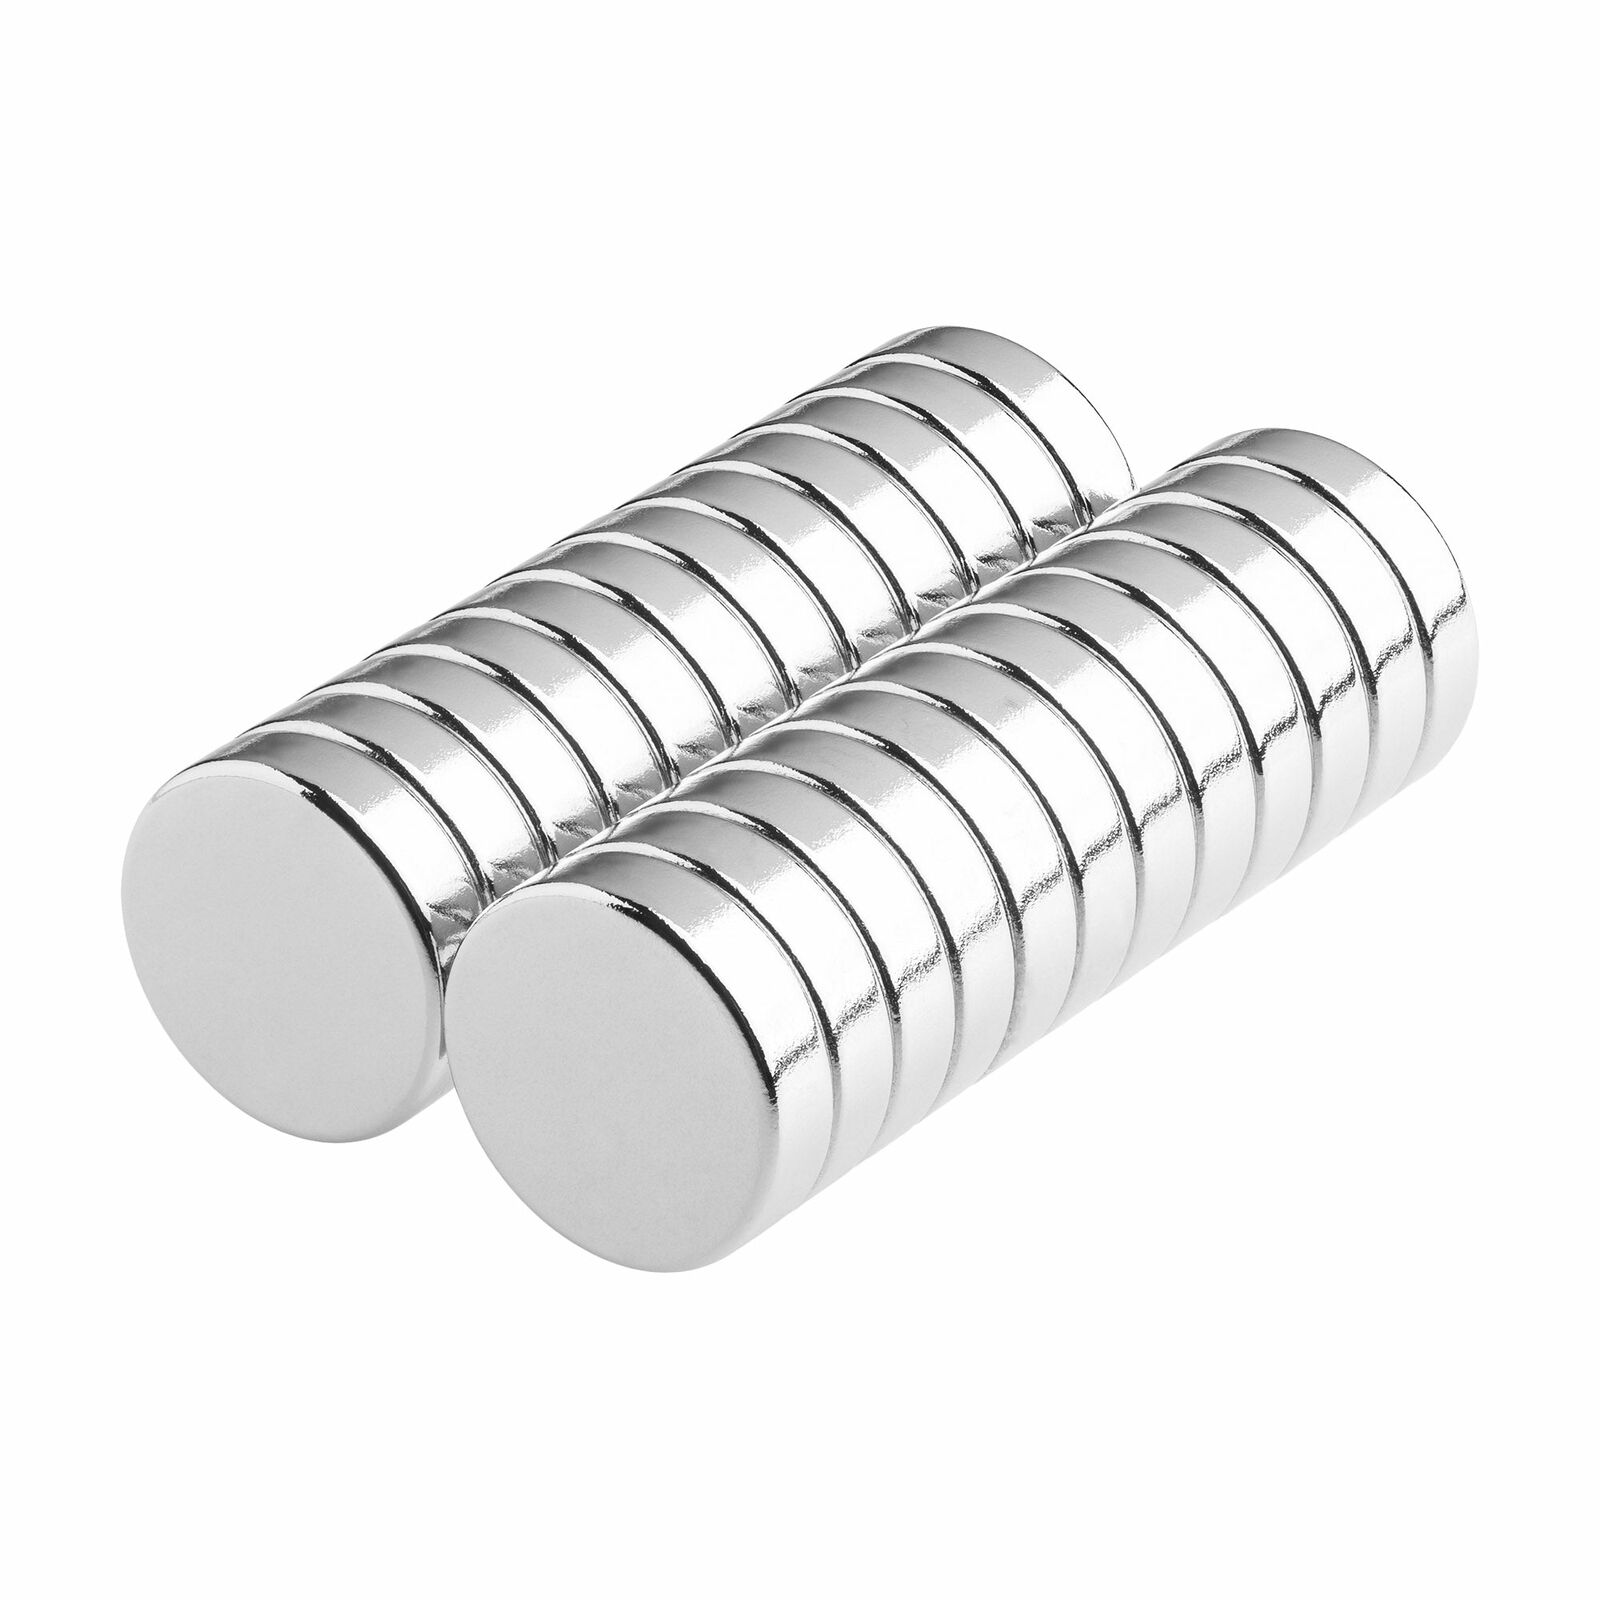 1/2 x 1/8 Inch Strong Neodymium Rare Earth Disc Magnets N52 (24 Pack)